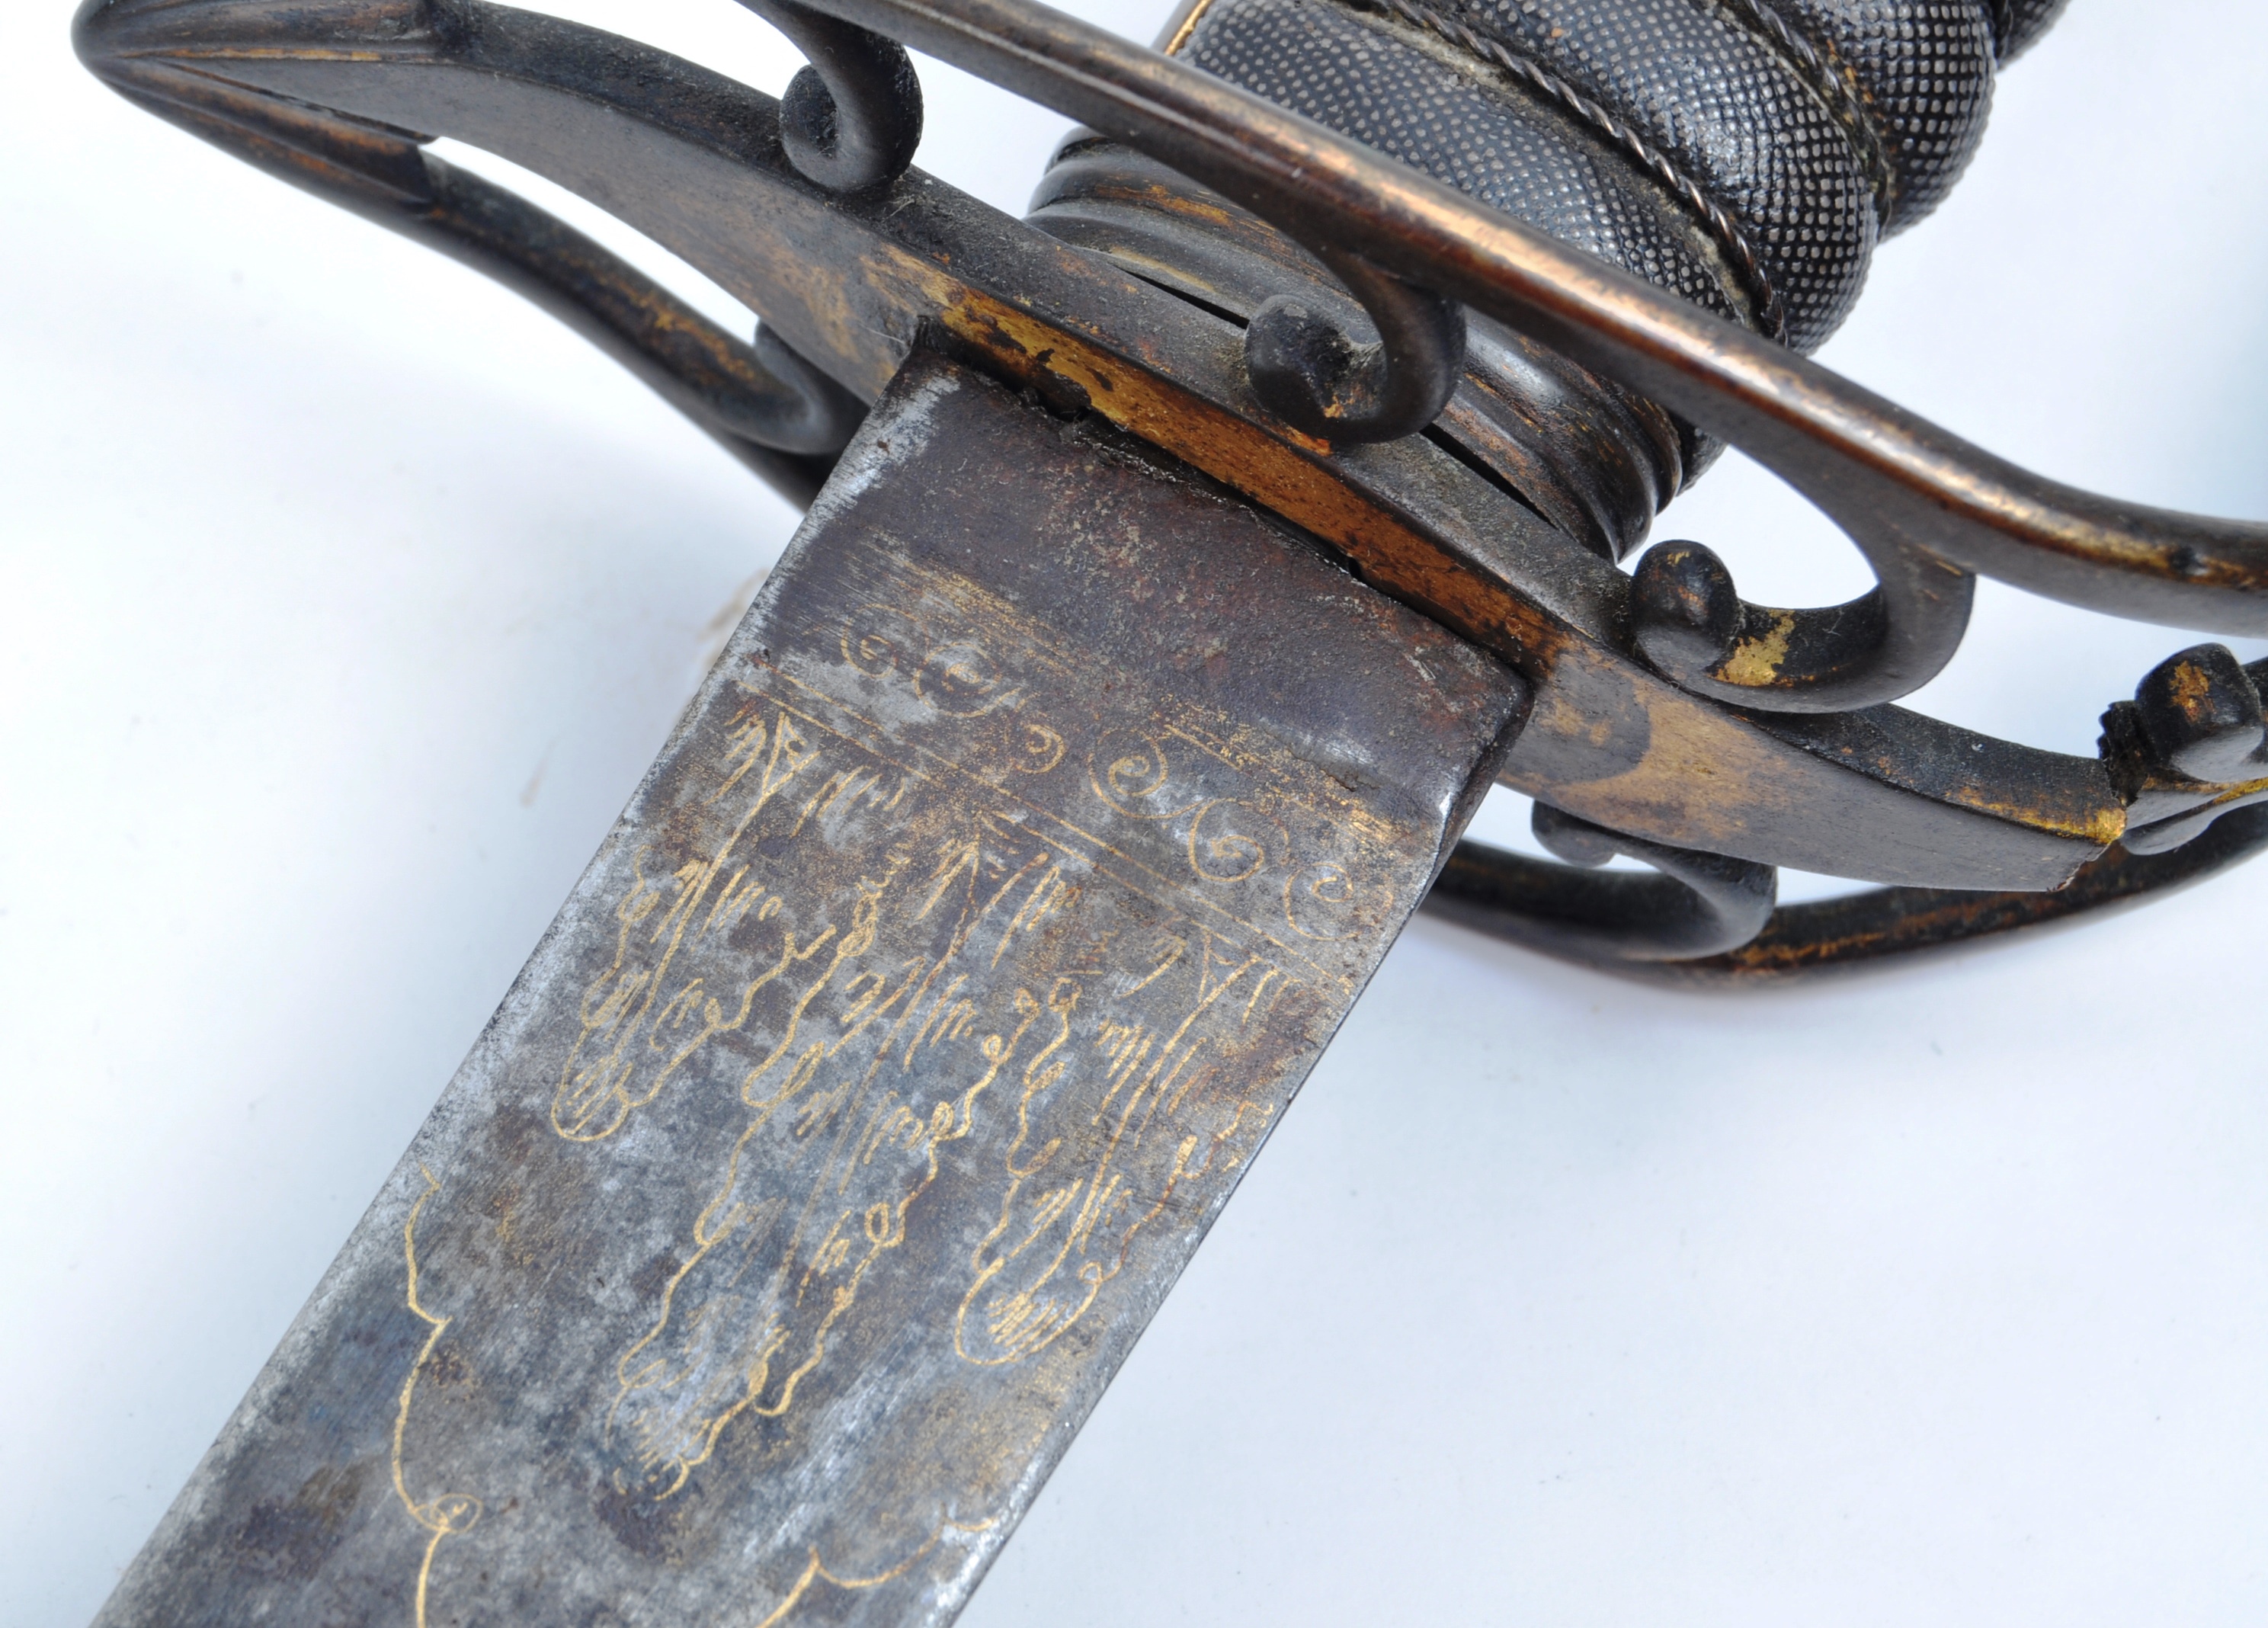 19TH CENTURY ANTIQUE 1803 PATTERN BRITISH FLANK INFANTRY SWORD - Image 3 of 7